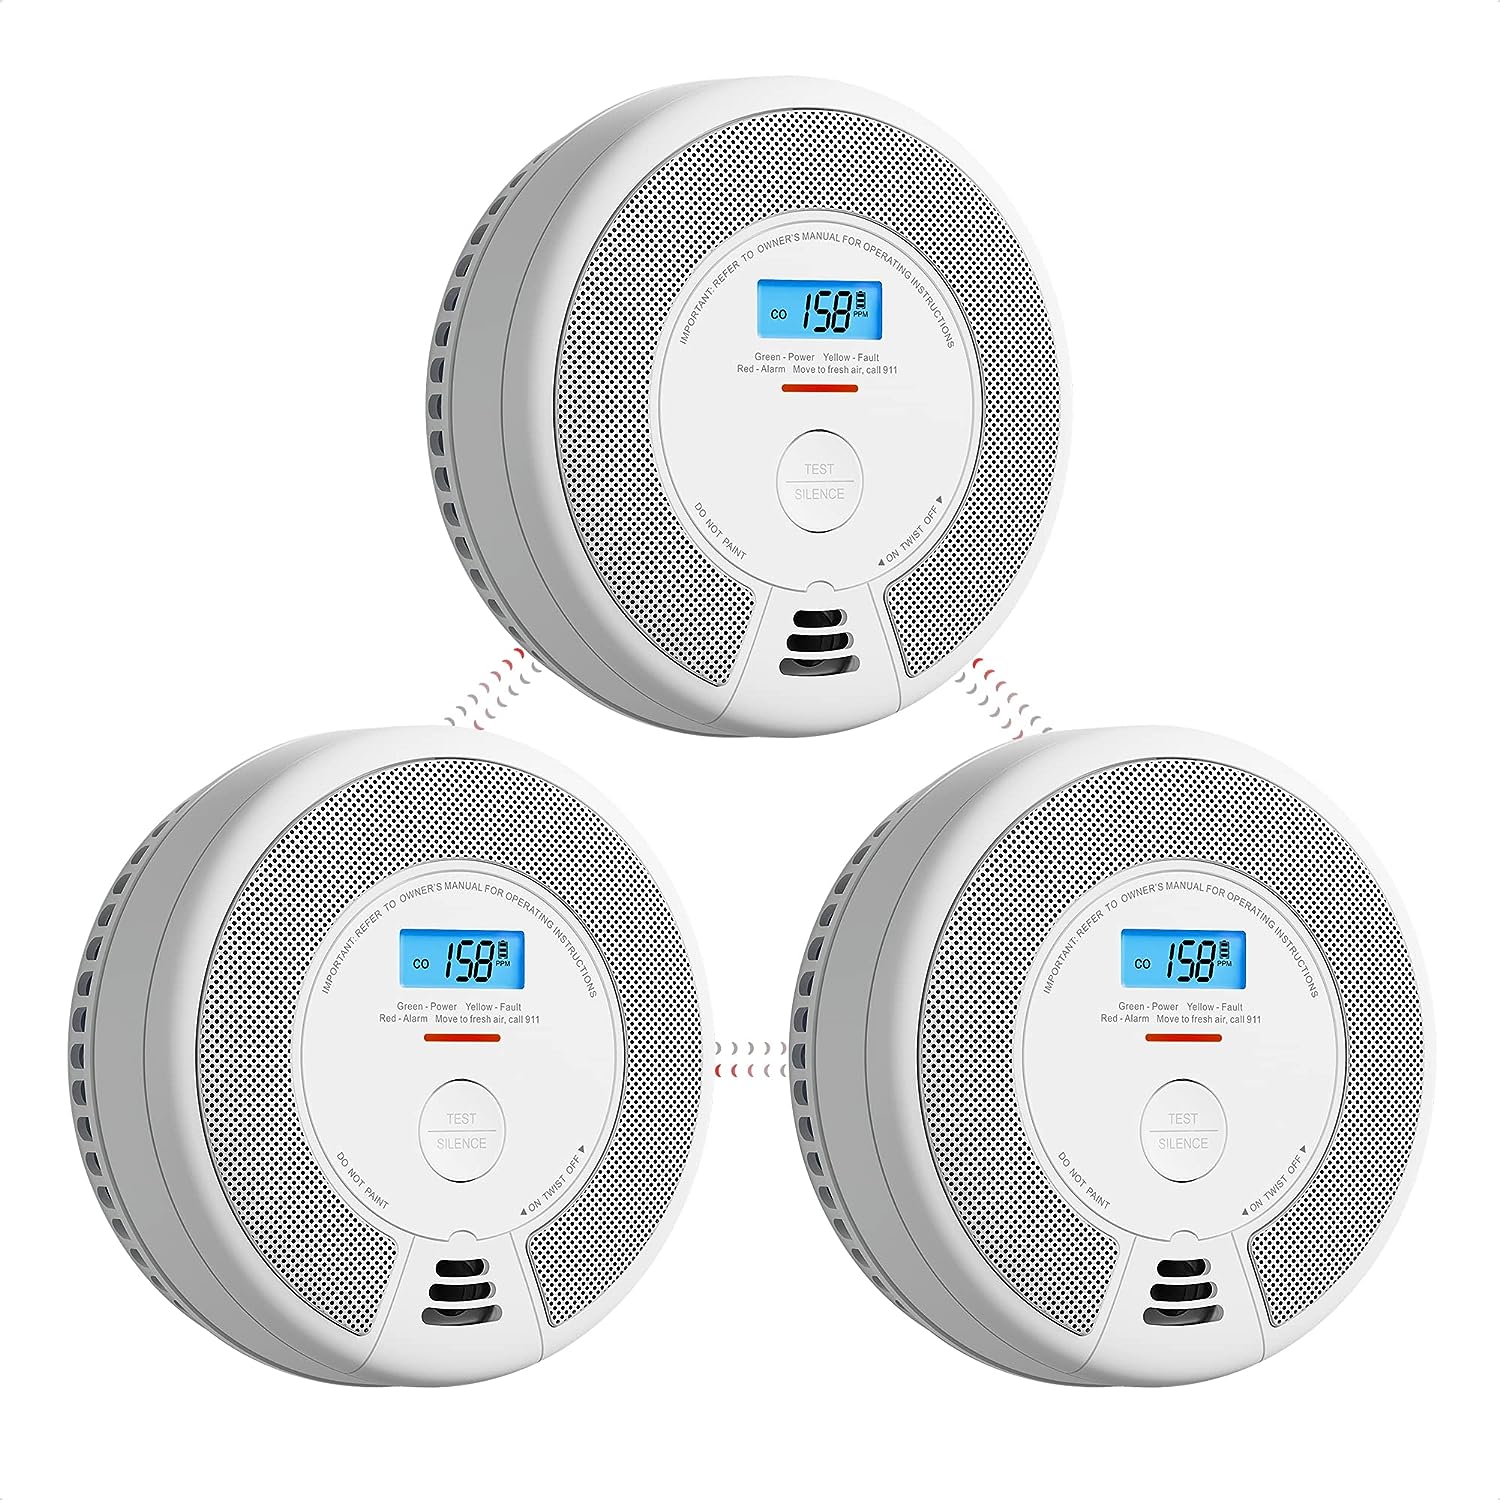 X-Sense Combination Smoke and Carbon Monoxide Detector with Voice Location  review - The Gadgeteer